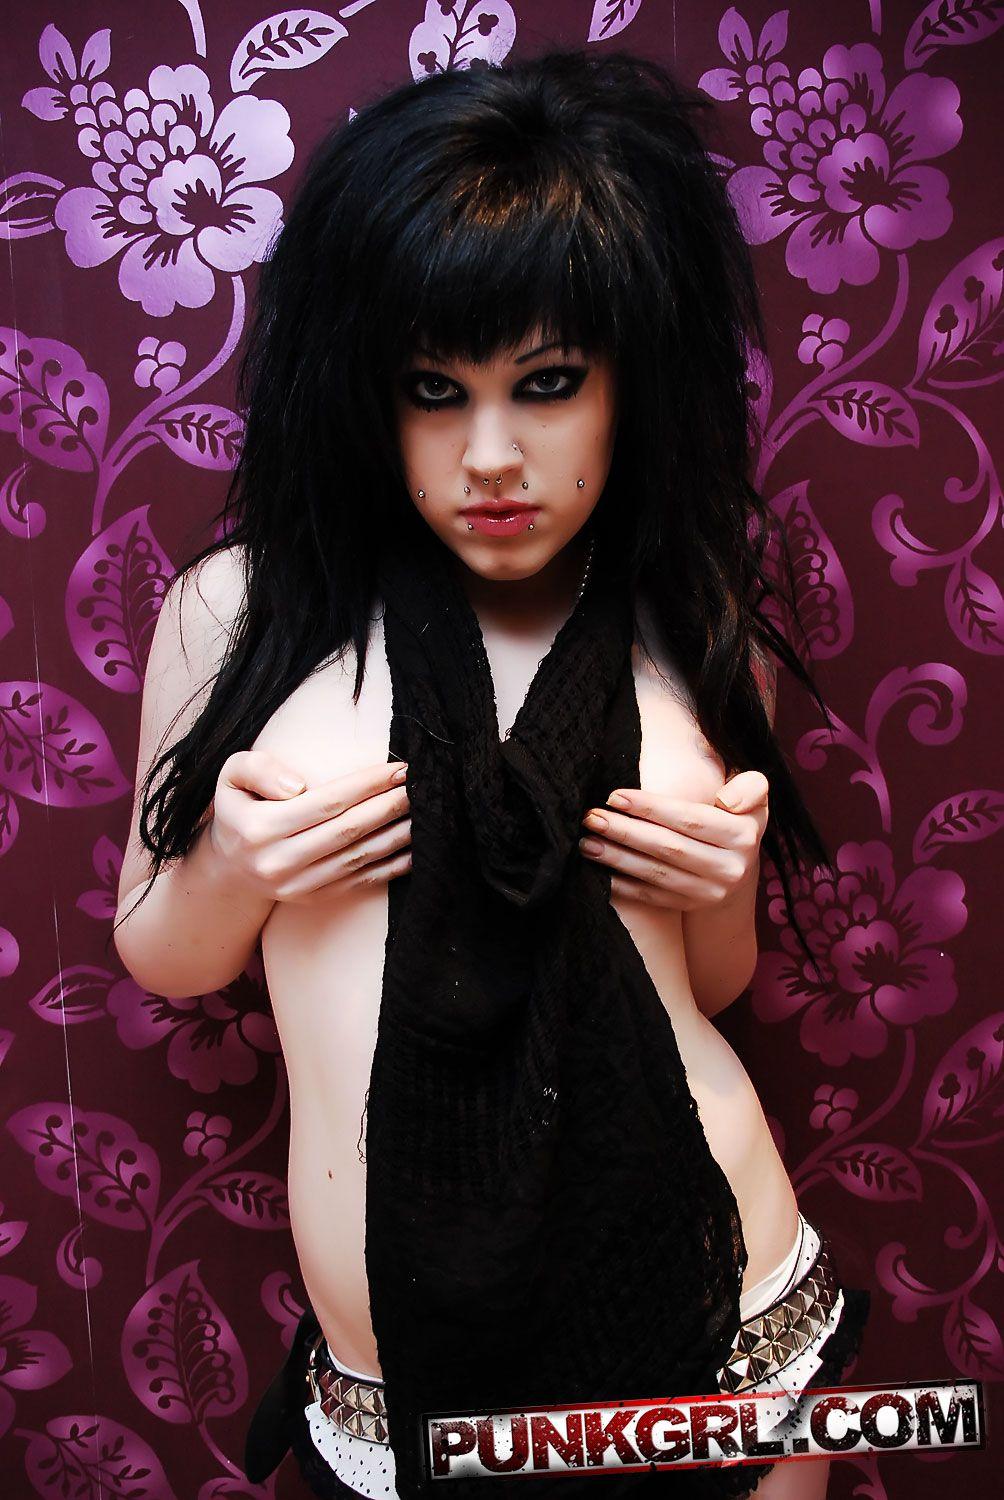 Pictures of goth teen girl LA showing off her hot body #60766542